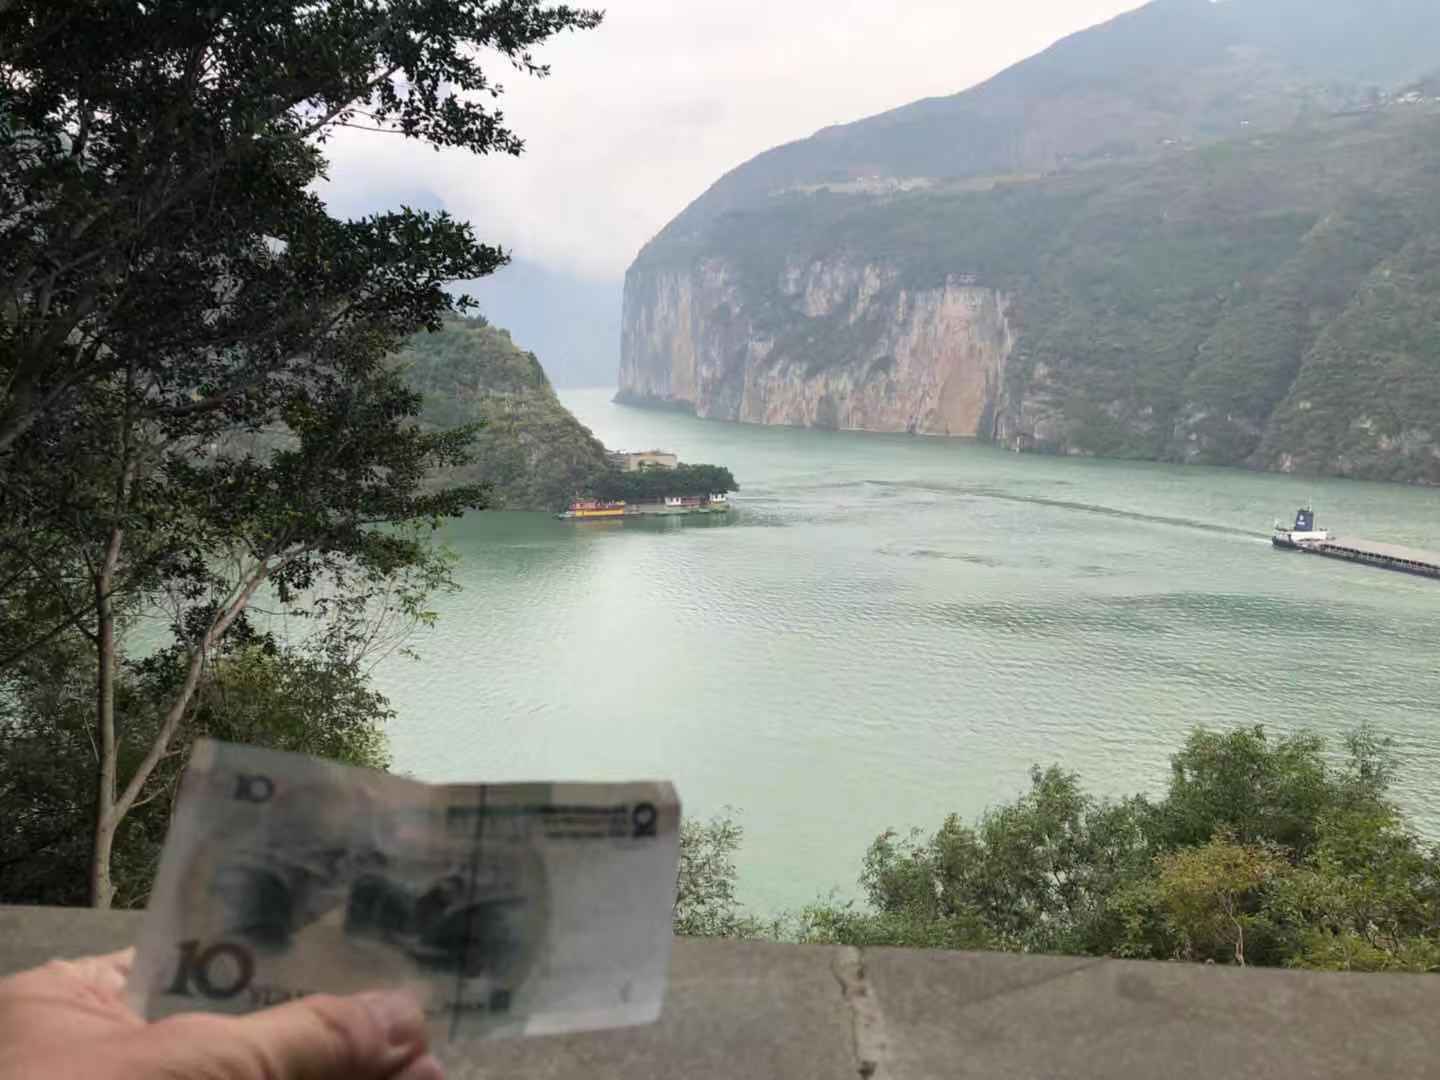 Kuimen along the Three Gorges